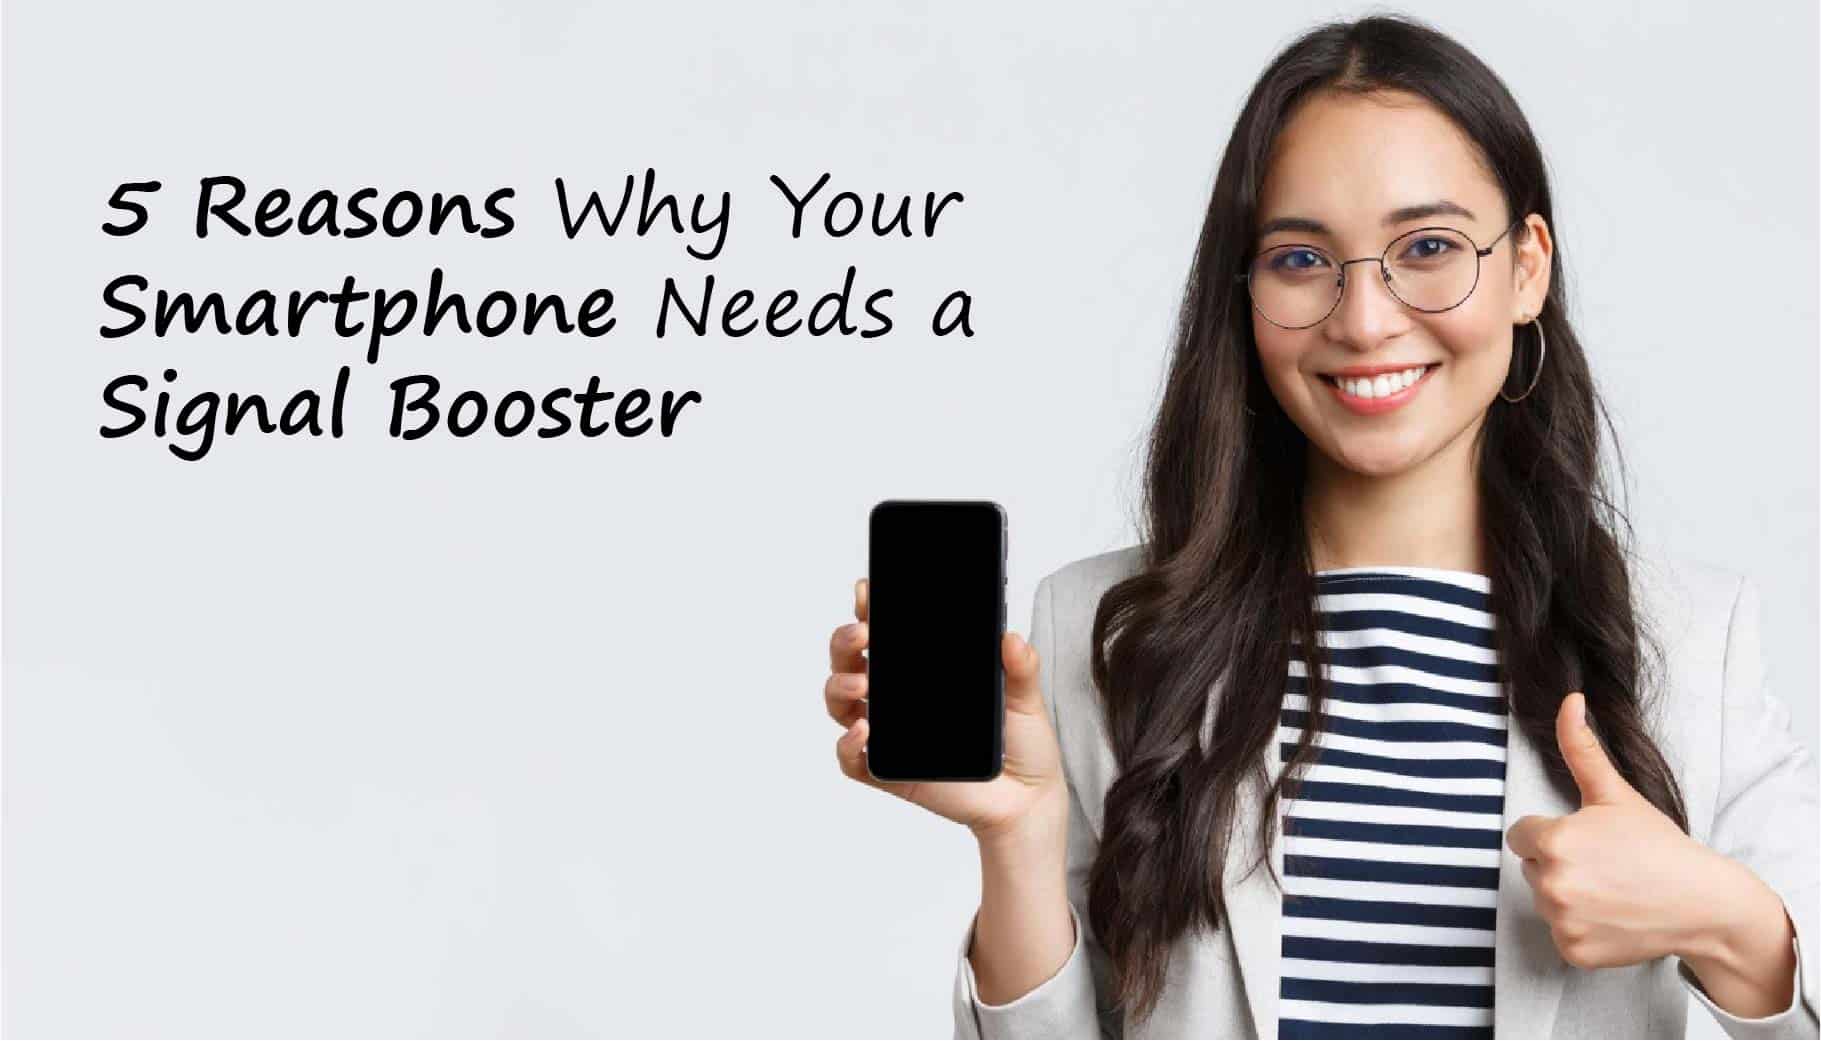 5-Reasons-Why-Your-Smartphone-Needs-a-Booster